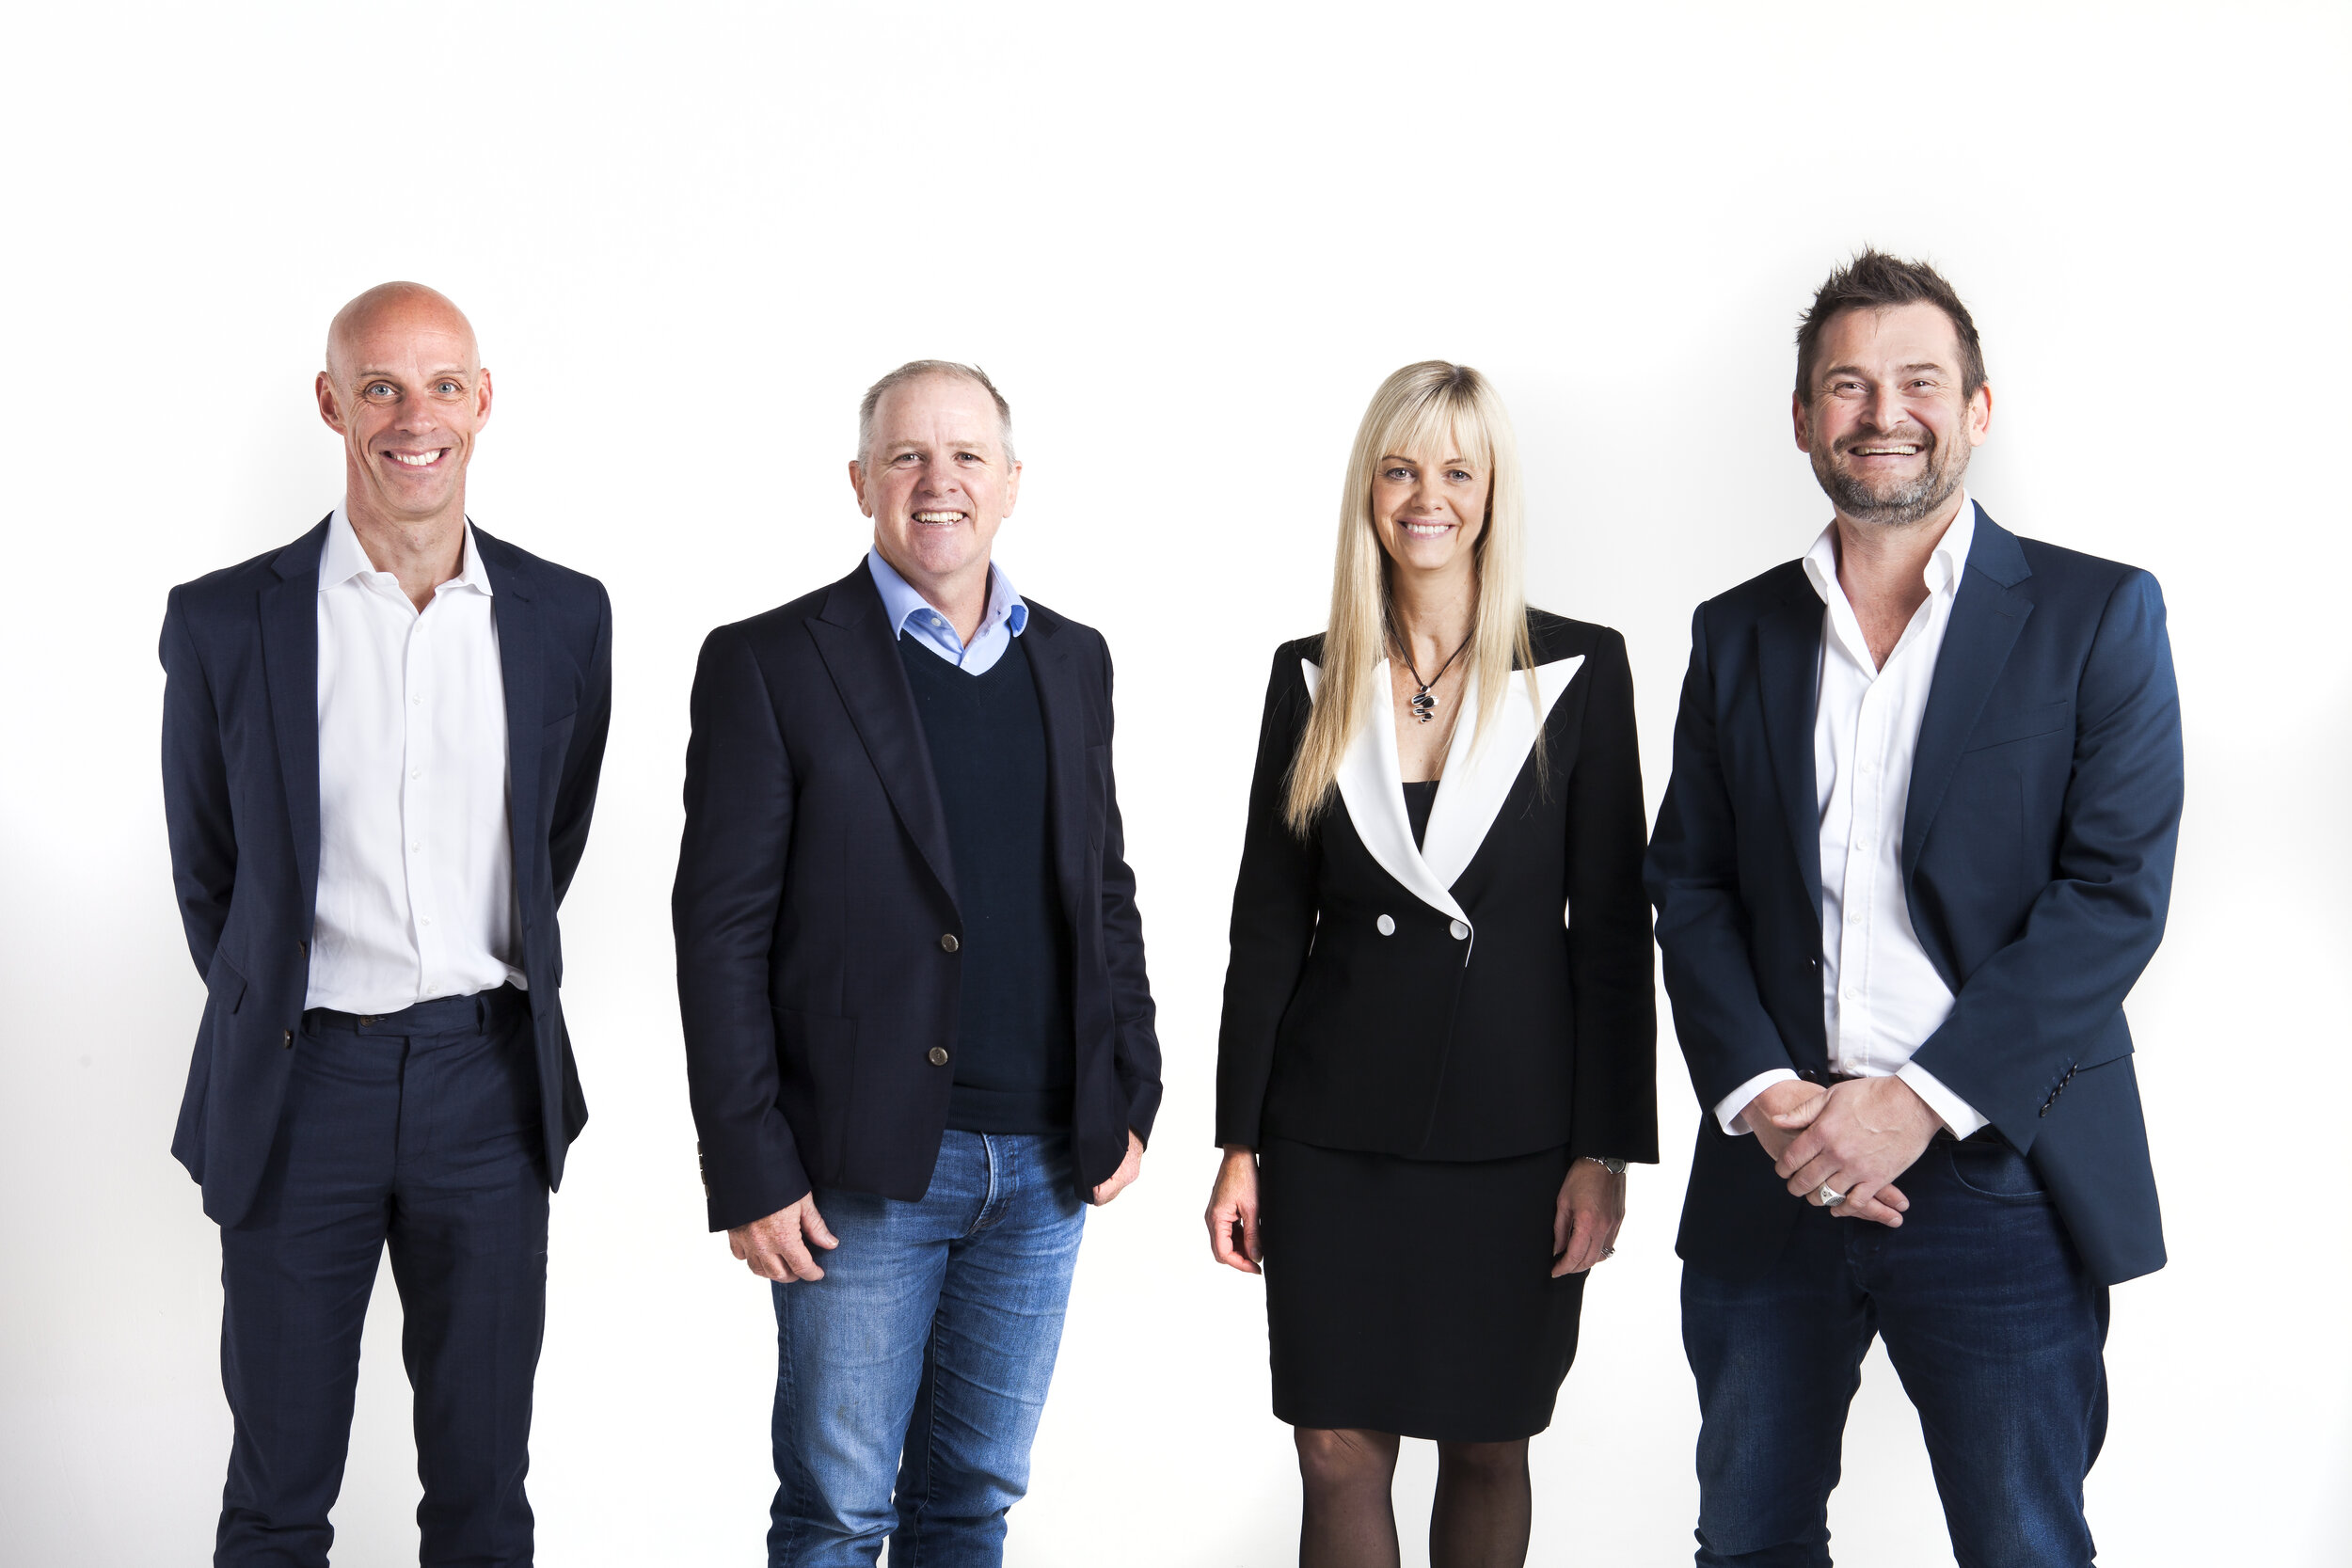 (From left to right) Grant Chamberlain (Partner, OneVentures), Phil Dodds (Co-CEO, Phocas), Dr Michelle Deaker (Managing Partner, OneVentures) and Myles Glashier (Founder and Co-CEO, Phocas).